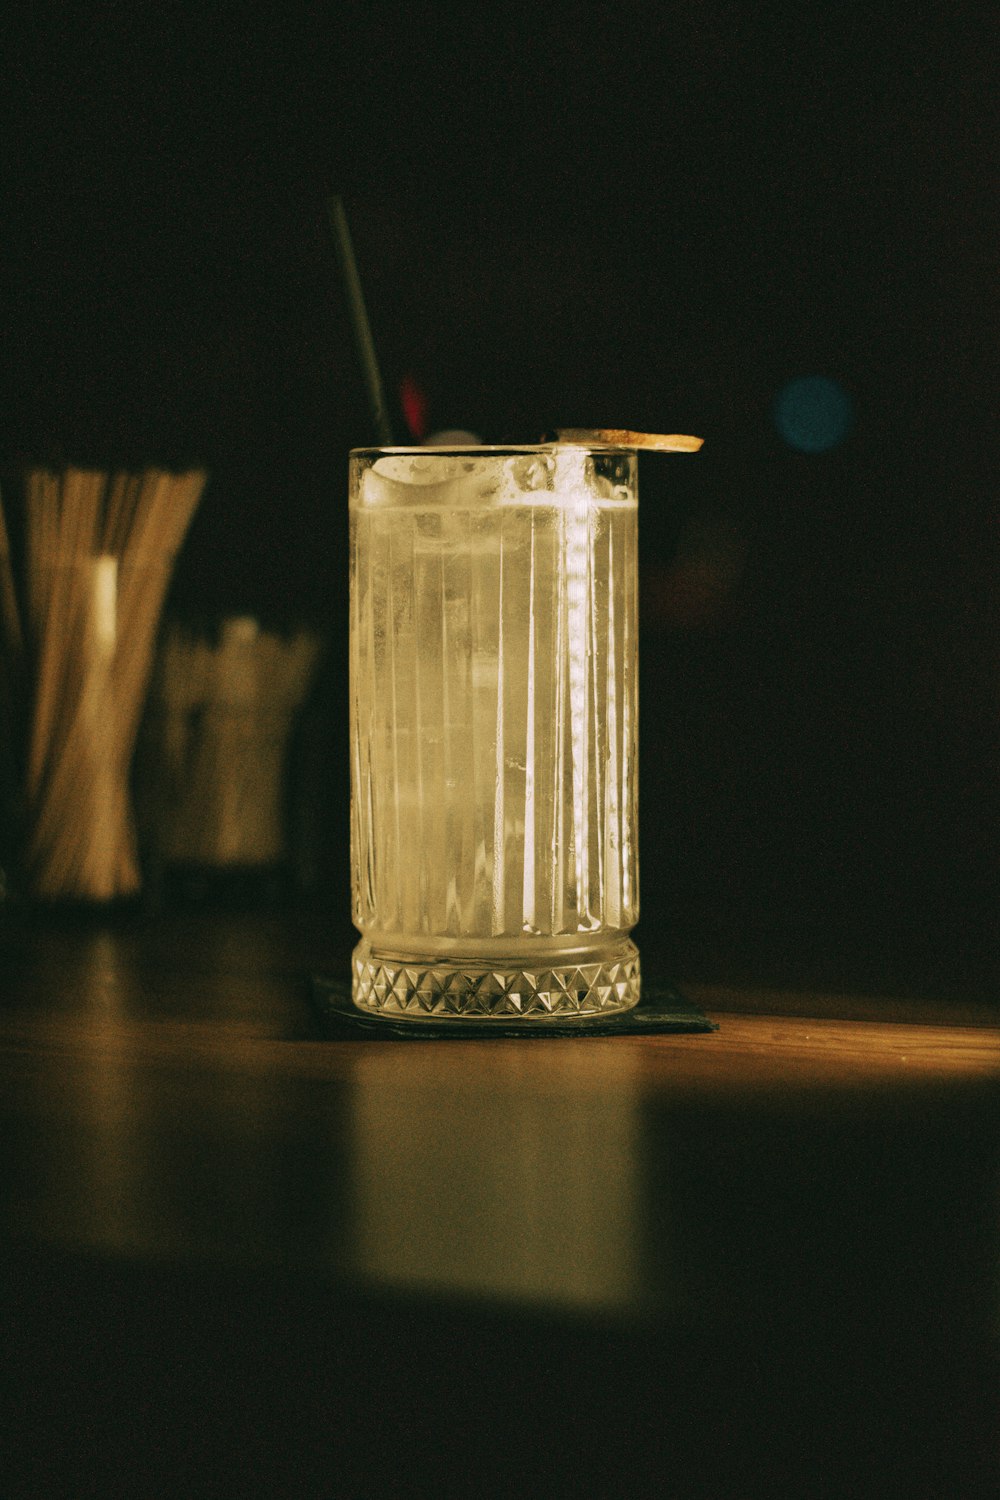 a glass with a straw in it sitting on a table